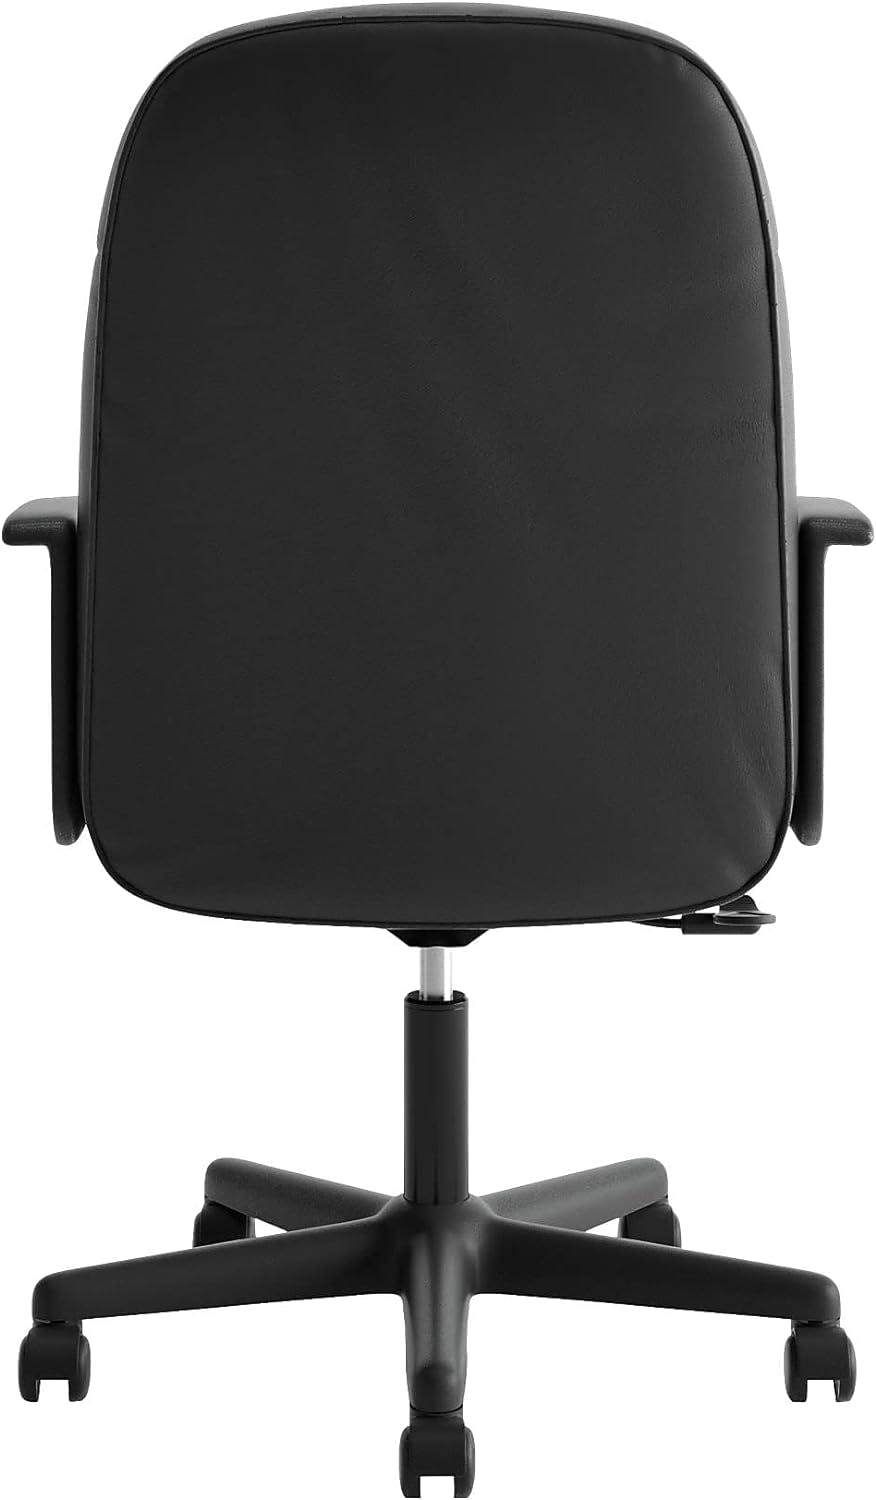 Elite Executive High-Back Black Leather Swivel Chair with Metal Base